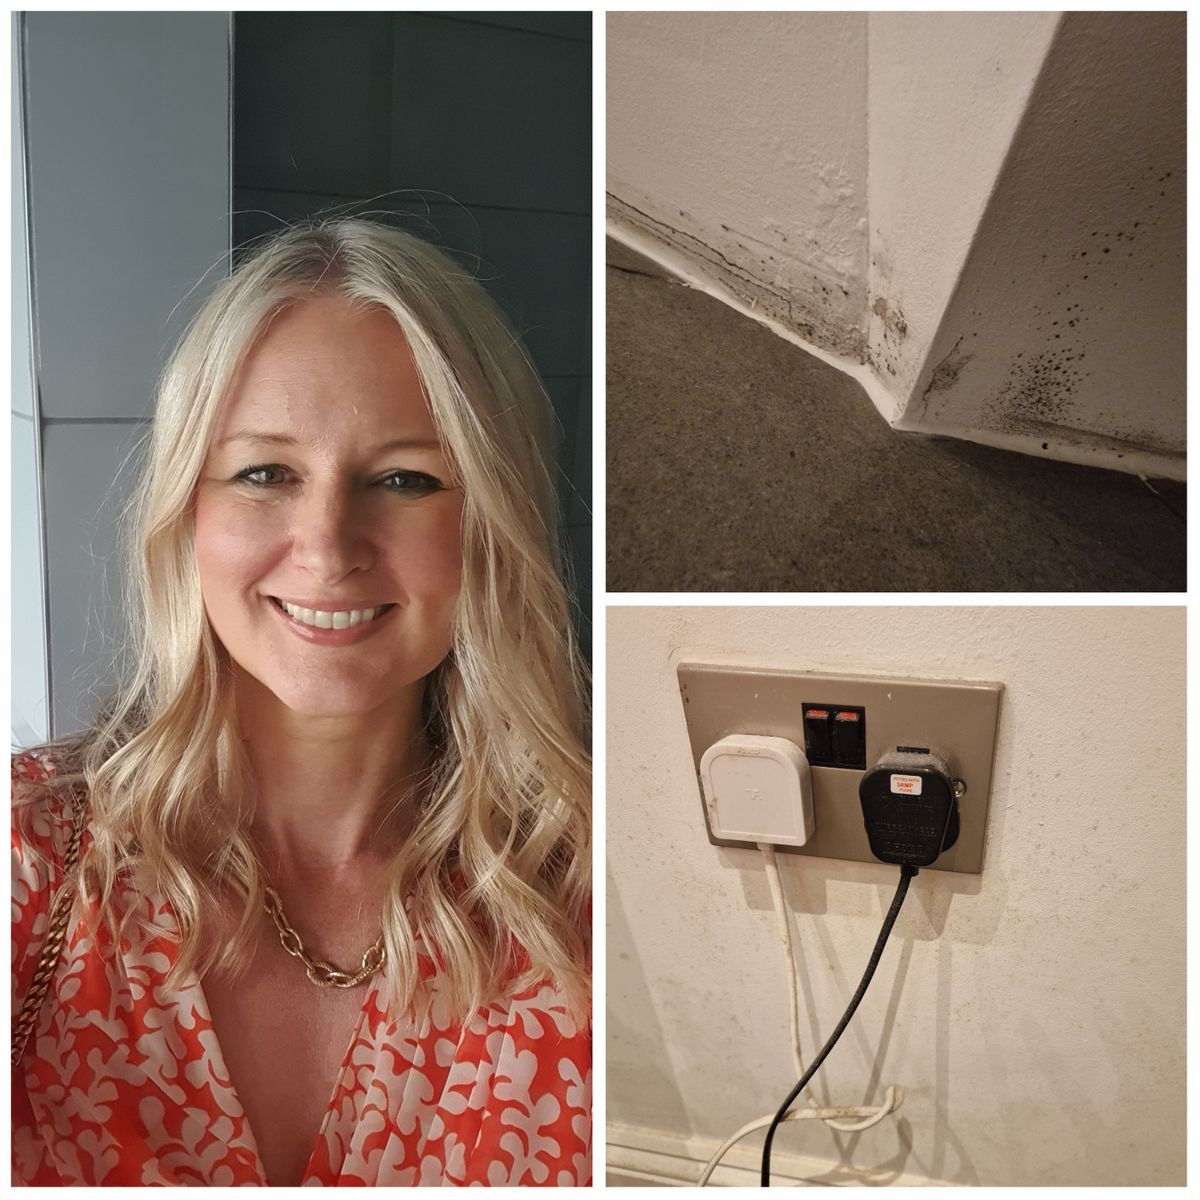 'I've lived with black mould and damp in my home for a year'